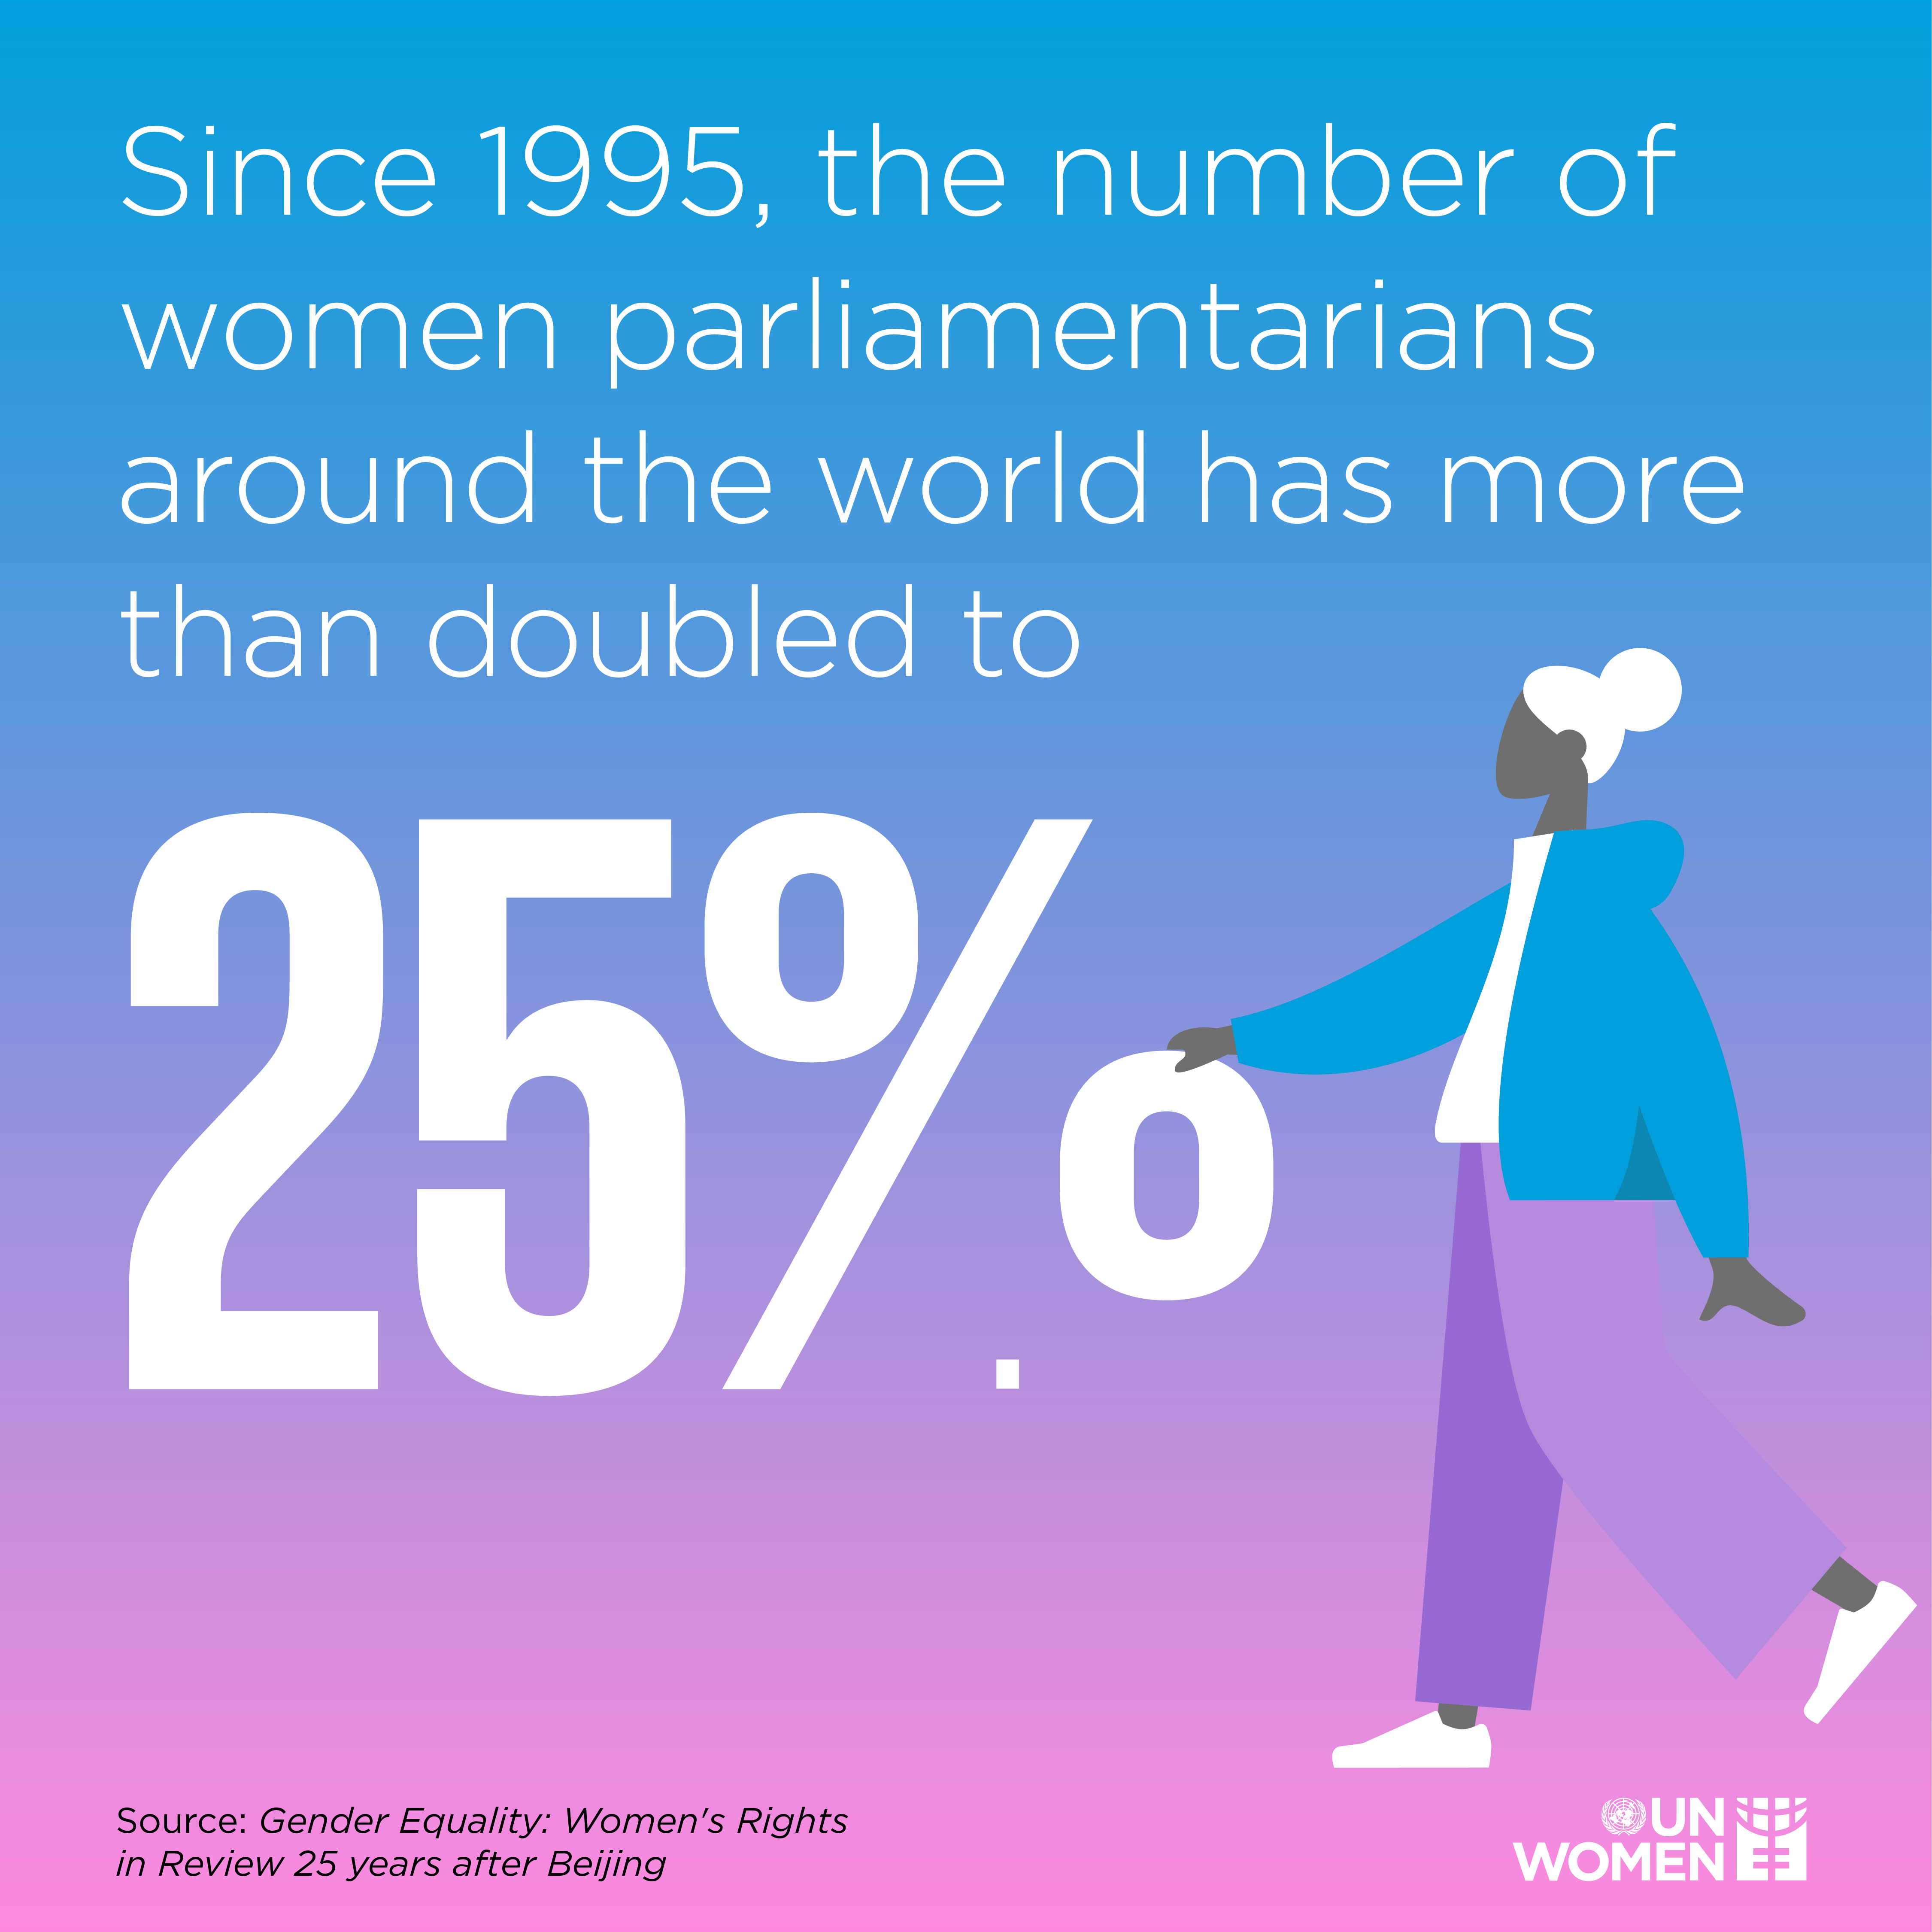 Since 1995, the number of women parliamentarians around the world has more than doubled to 25%